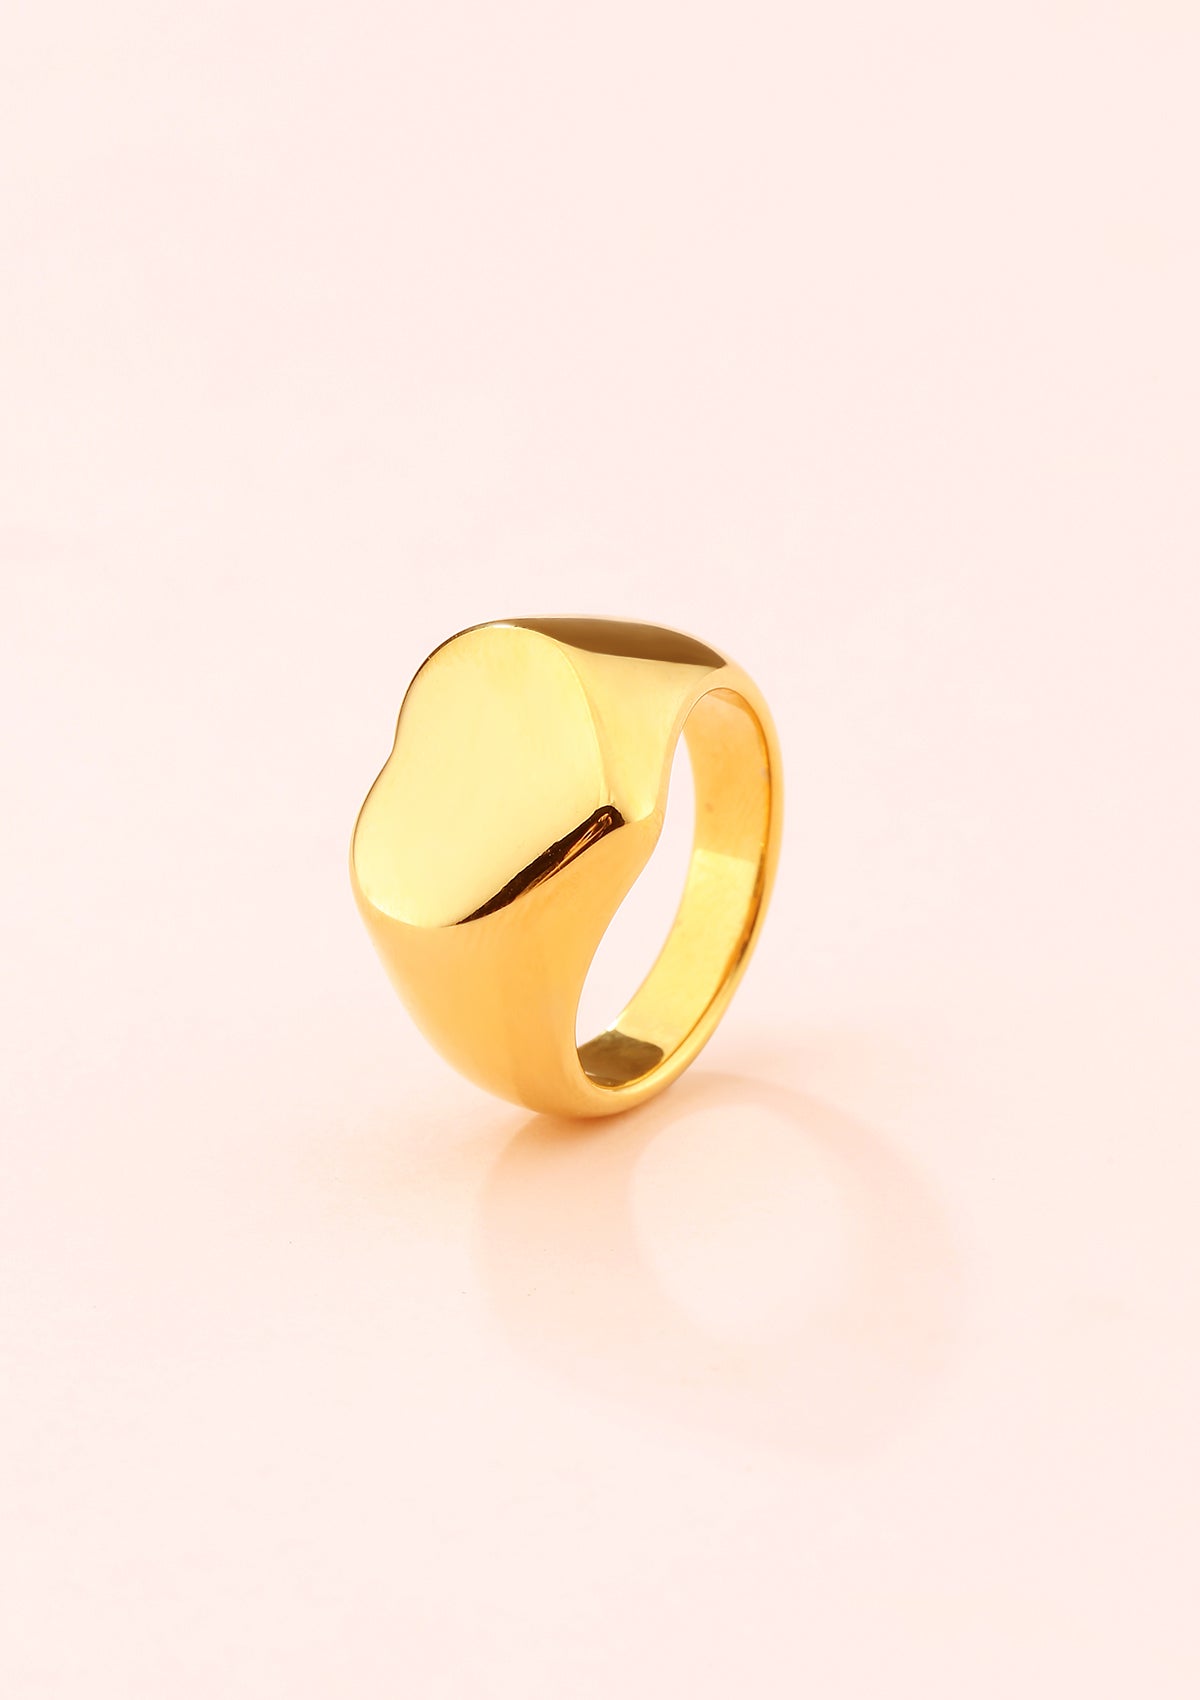 Chunky Heart Ring Gold